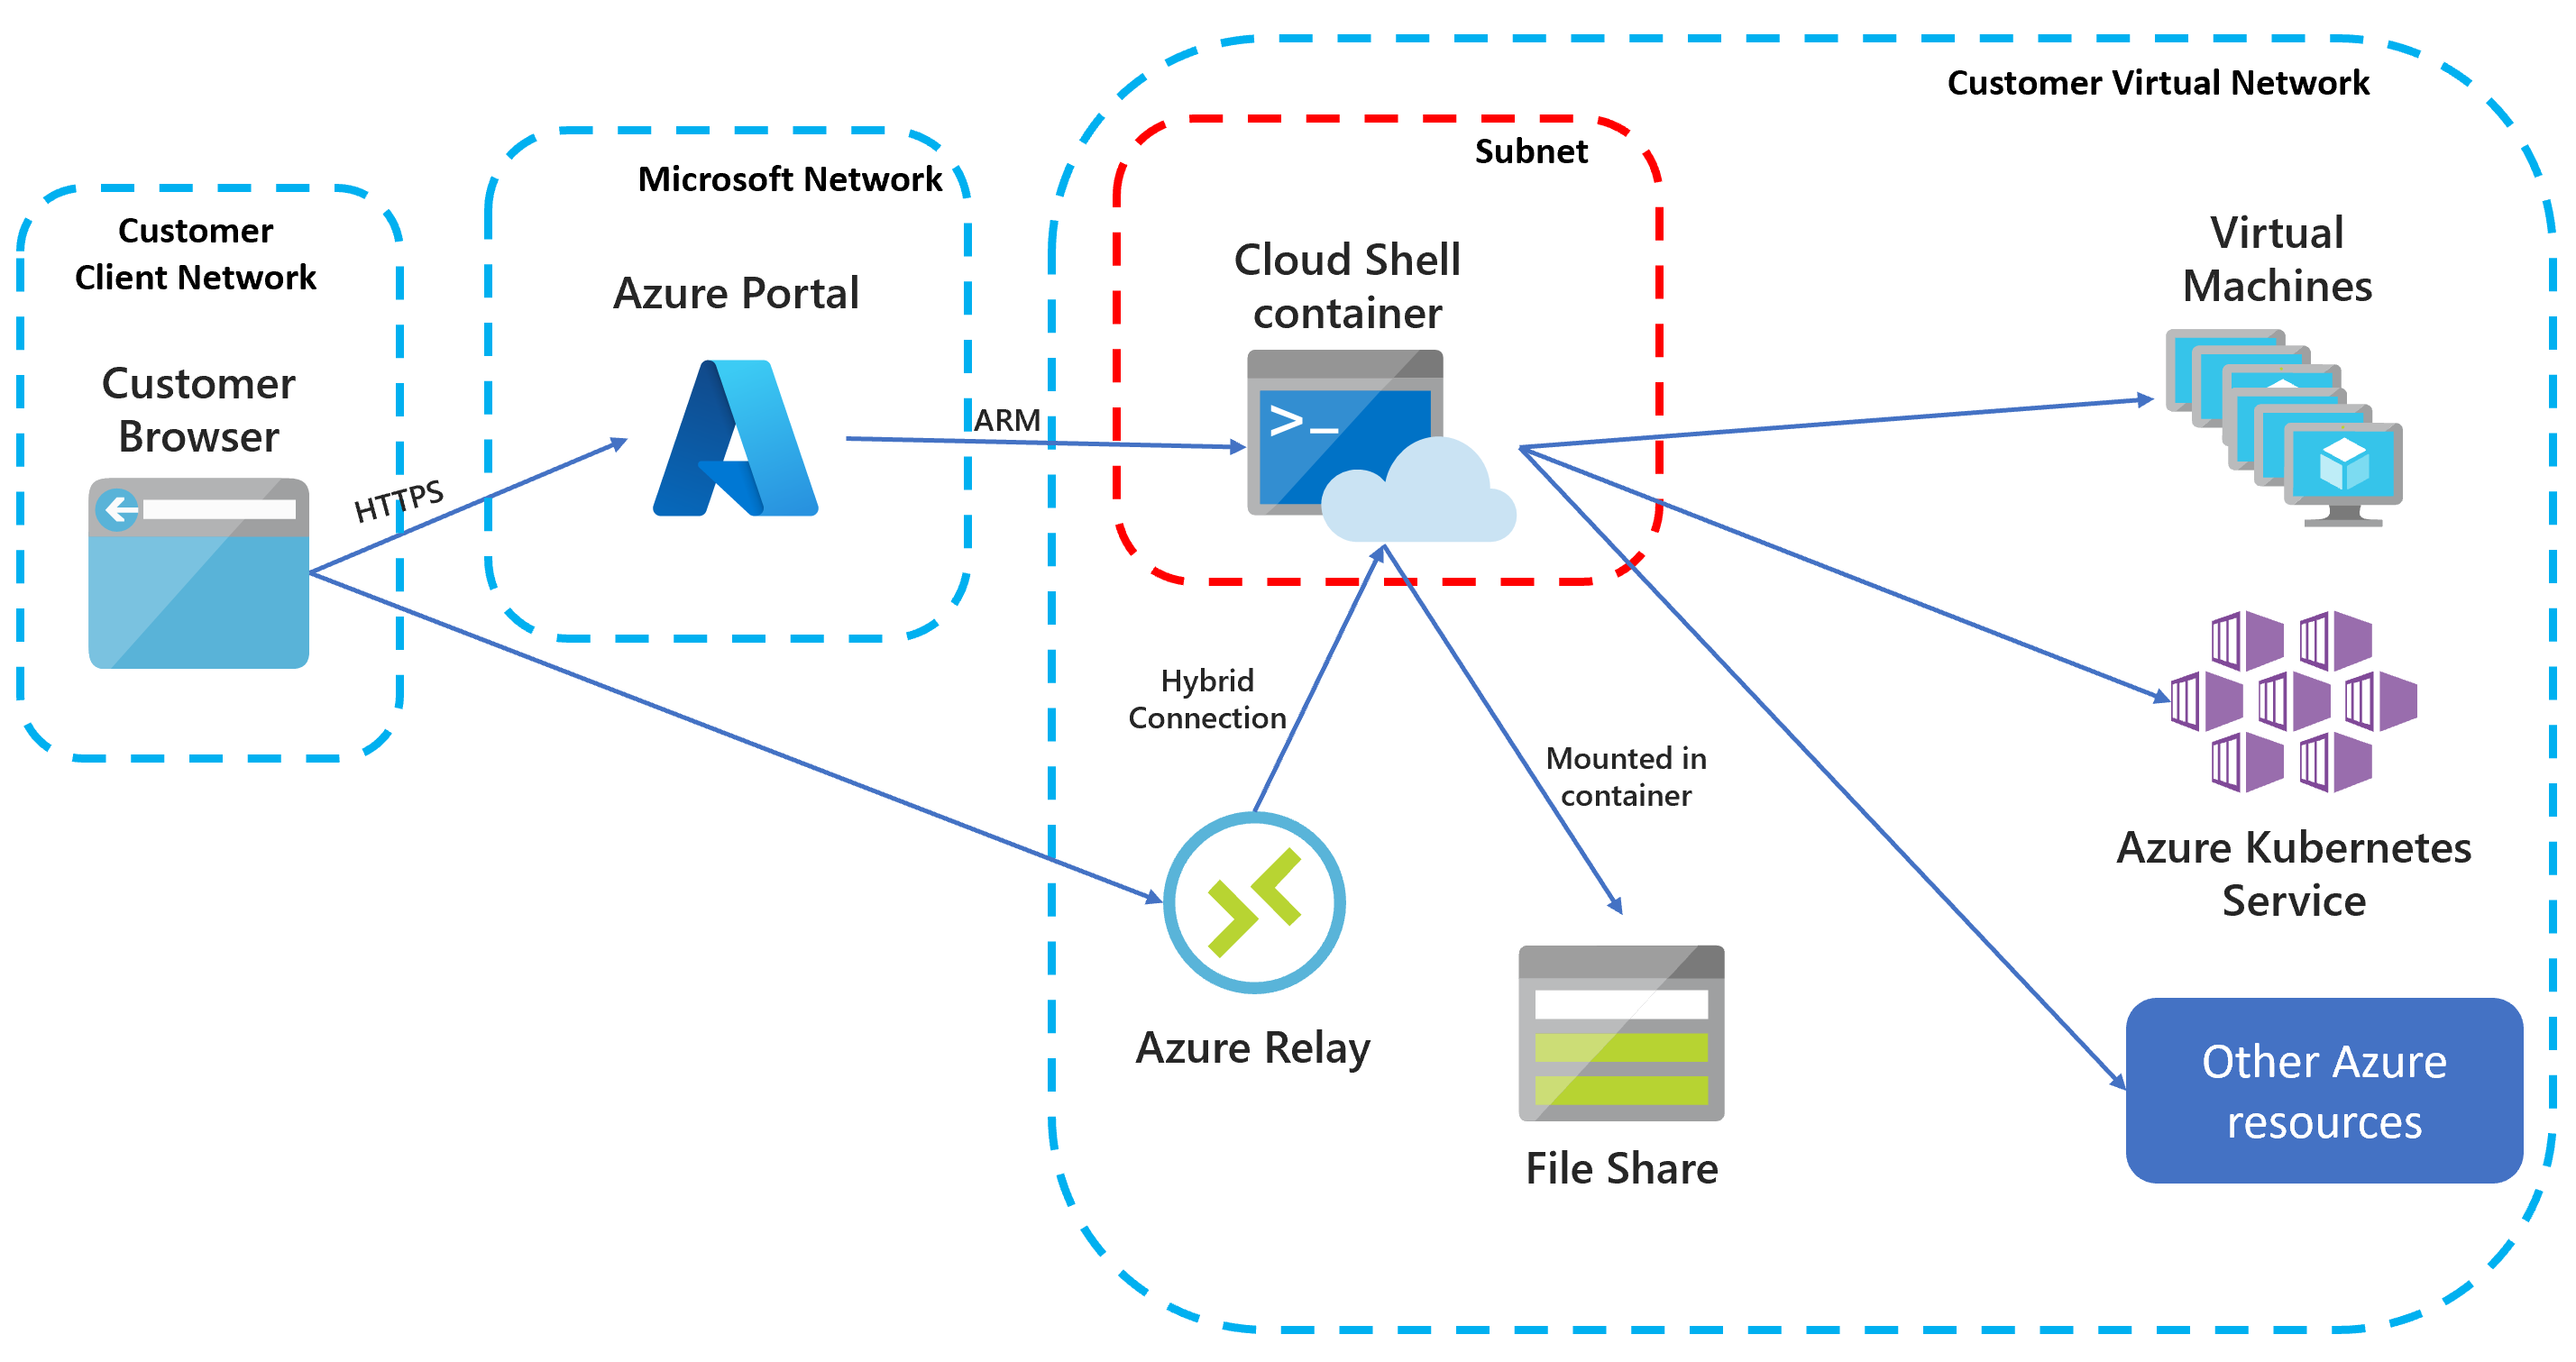 Illustrates the Cloud Shell isolated VNET architecture.